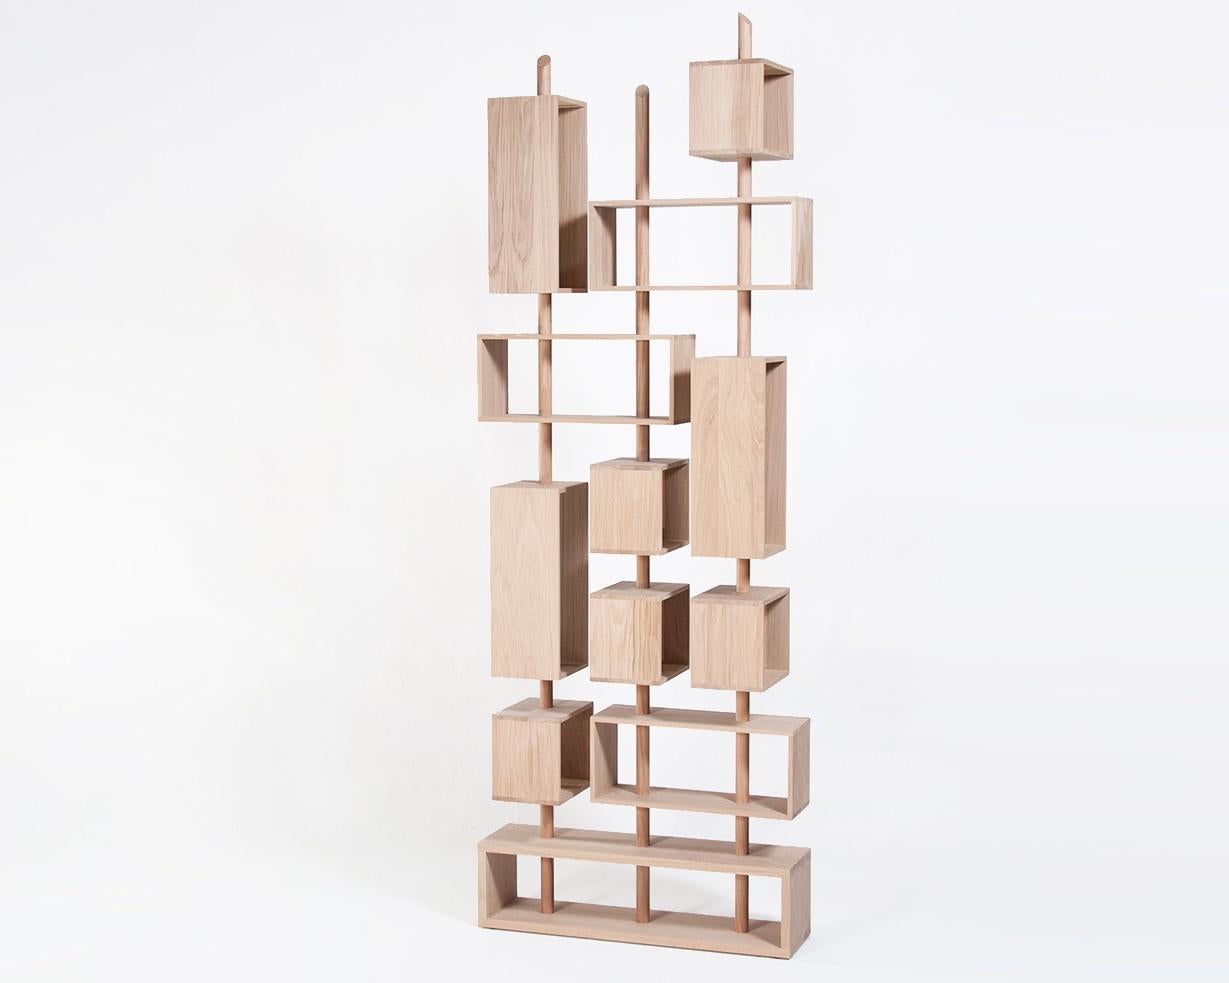 11 units slide and 7 rotate on 3 axis, giving this bookcase multiple design and use as per your inspiration and your needs.
100% solid oak from sustainable French forests. Delivered assembled. Units to be adjusted. Designed and made in Anjou